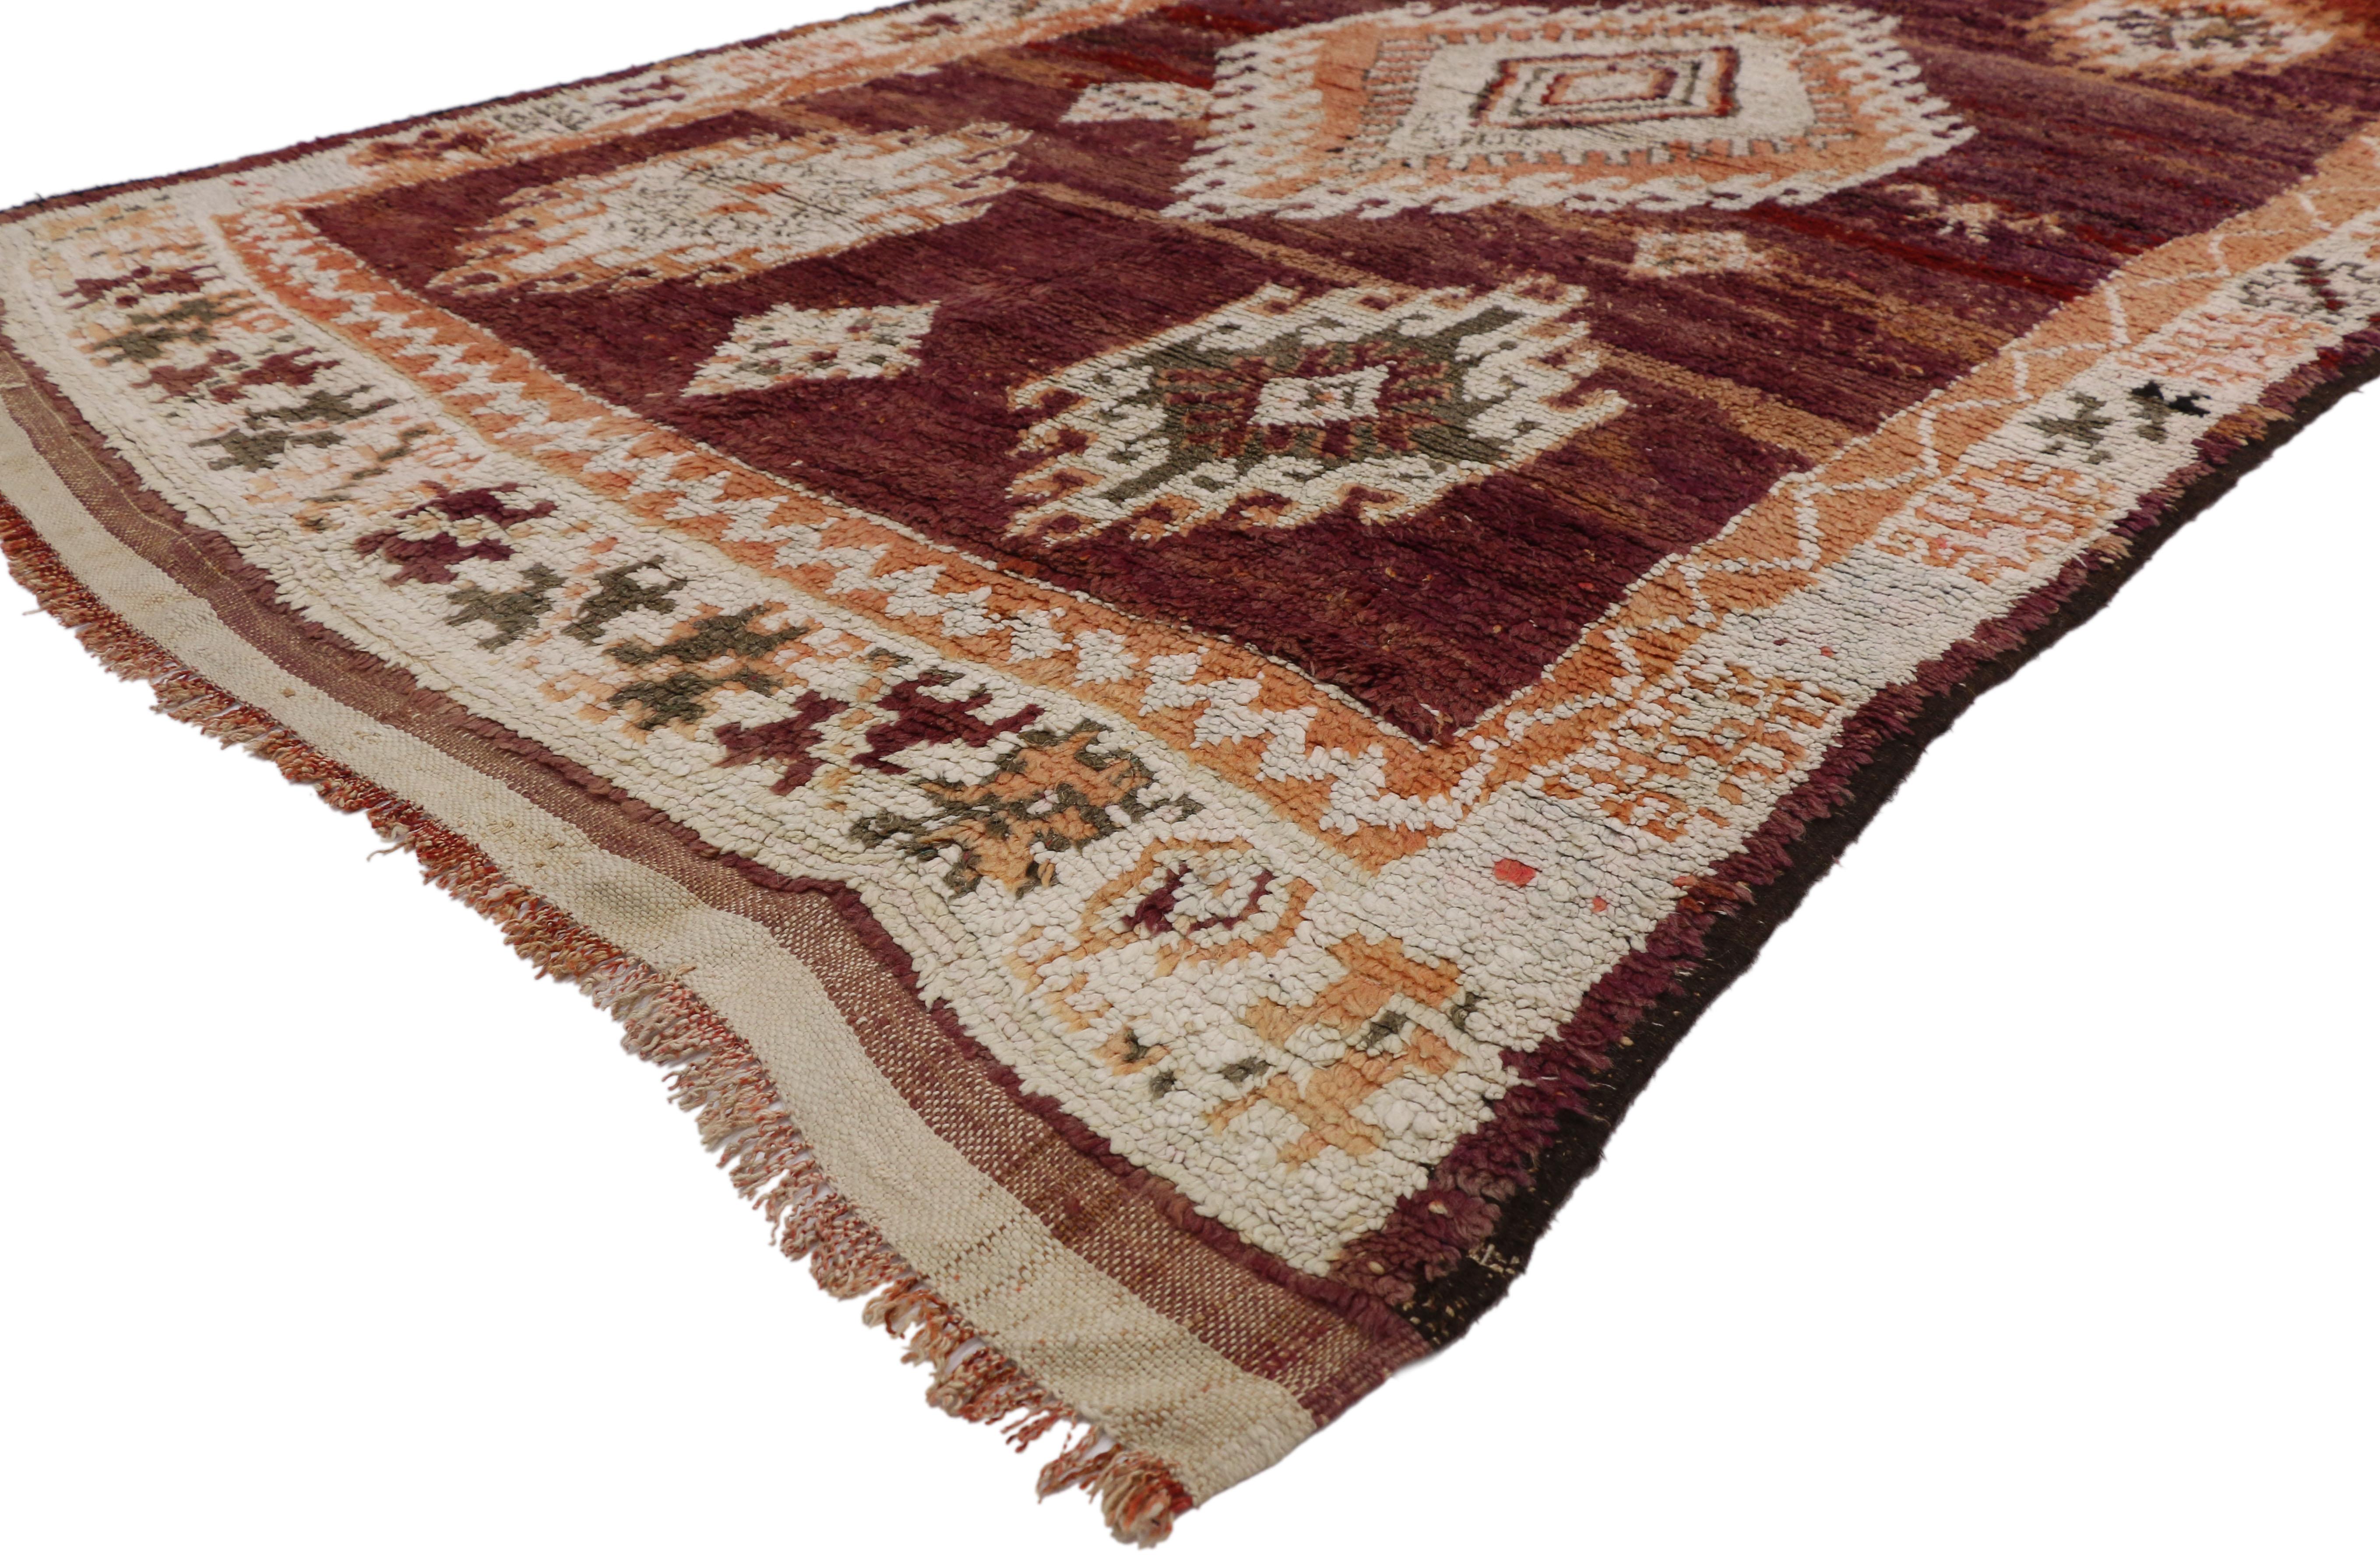 20778, vintage Berber Moroccan rug with Bohemian style. This hand knotted wool vintage Berber Moroccan rug features an all-over geometric design composed of five amulet style medallions with latch-hooks, diamonds and lozenges floating in a sea of